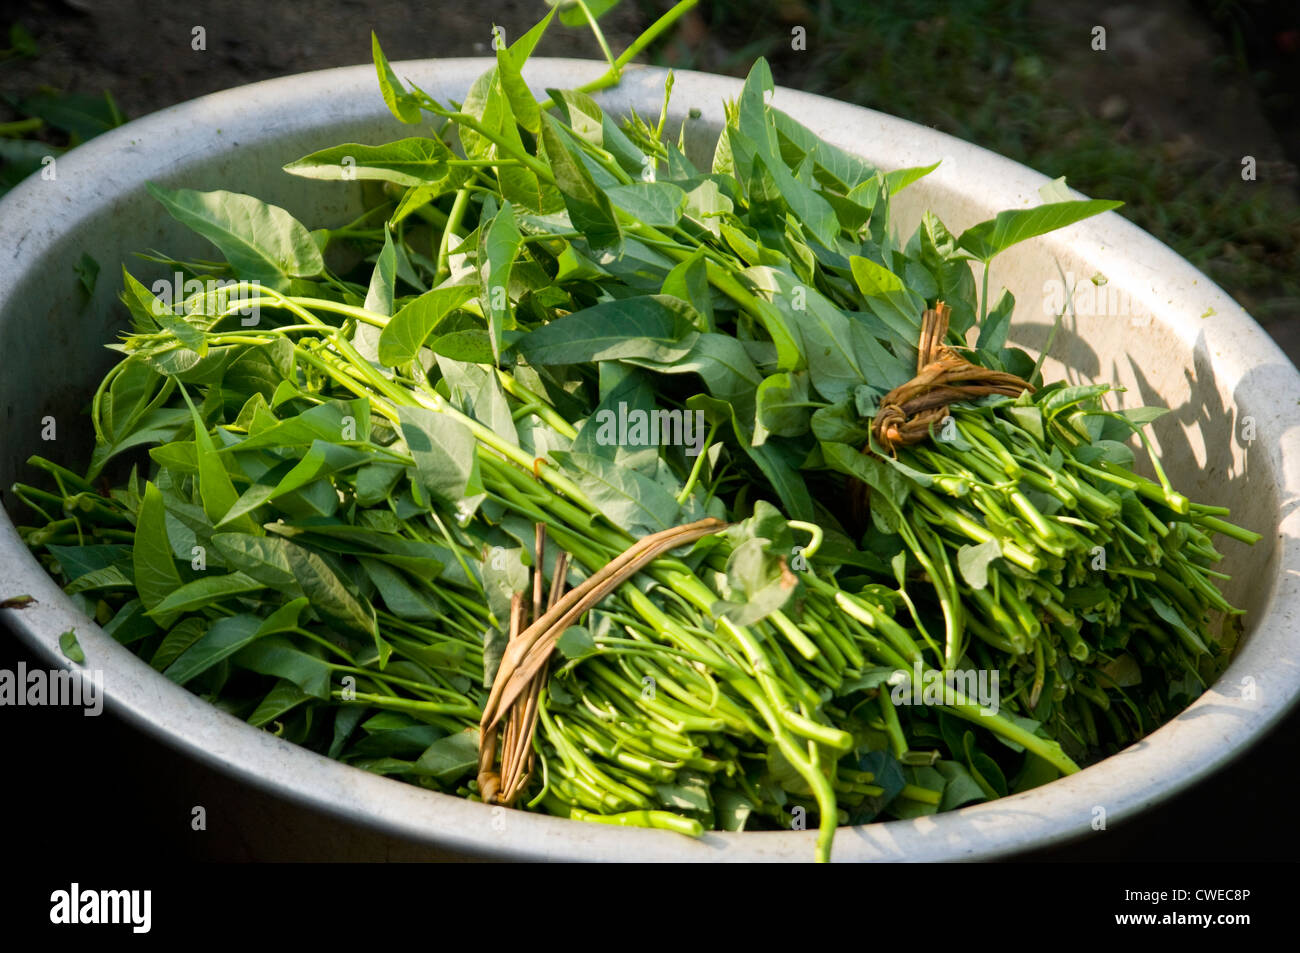 Horizontal close up of some freshly harvested rau muống, or water spinach, a common vegetable in Vietnam. Stock Photo